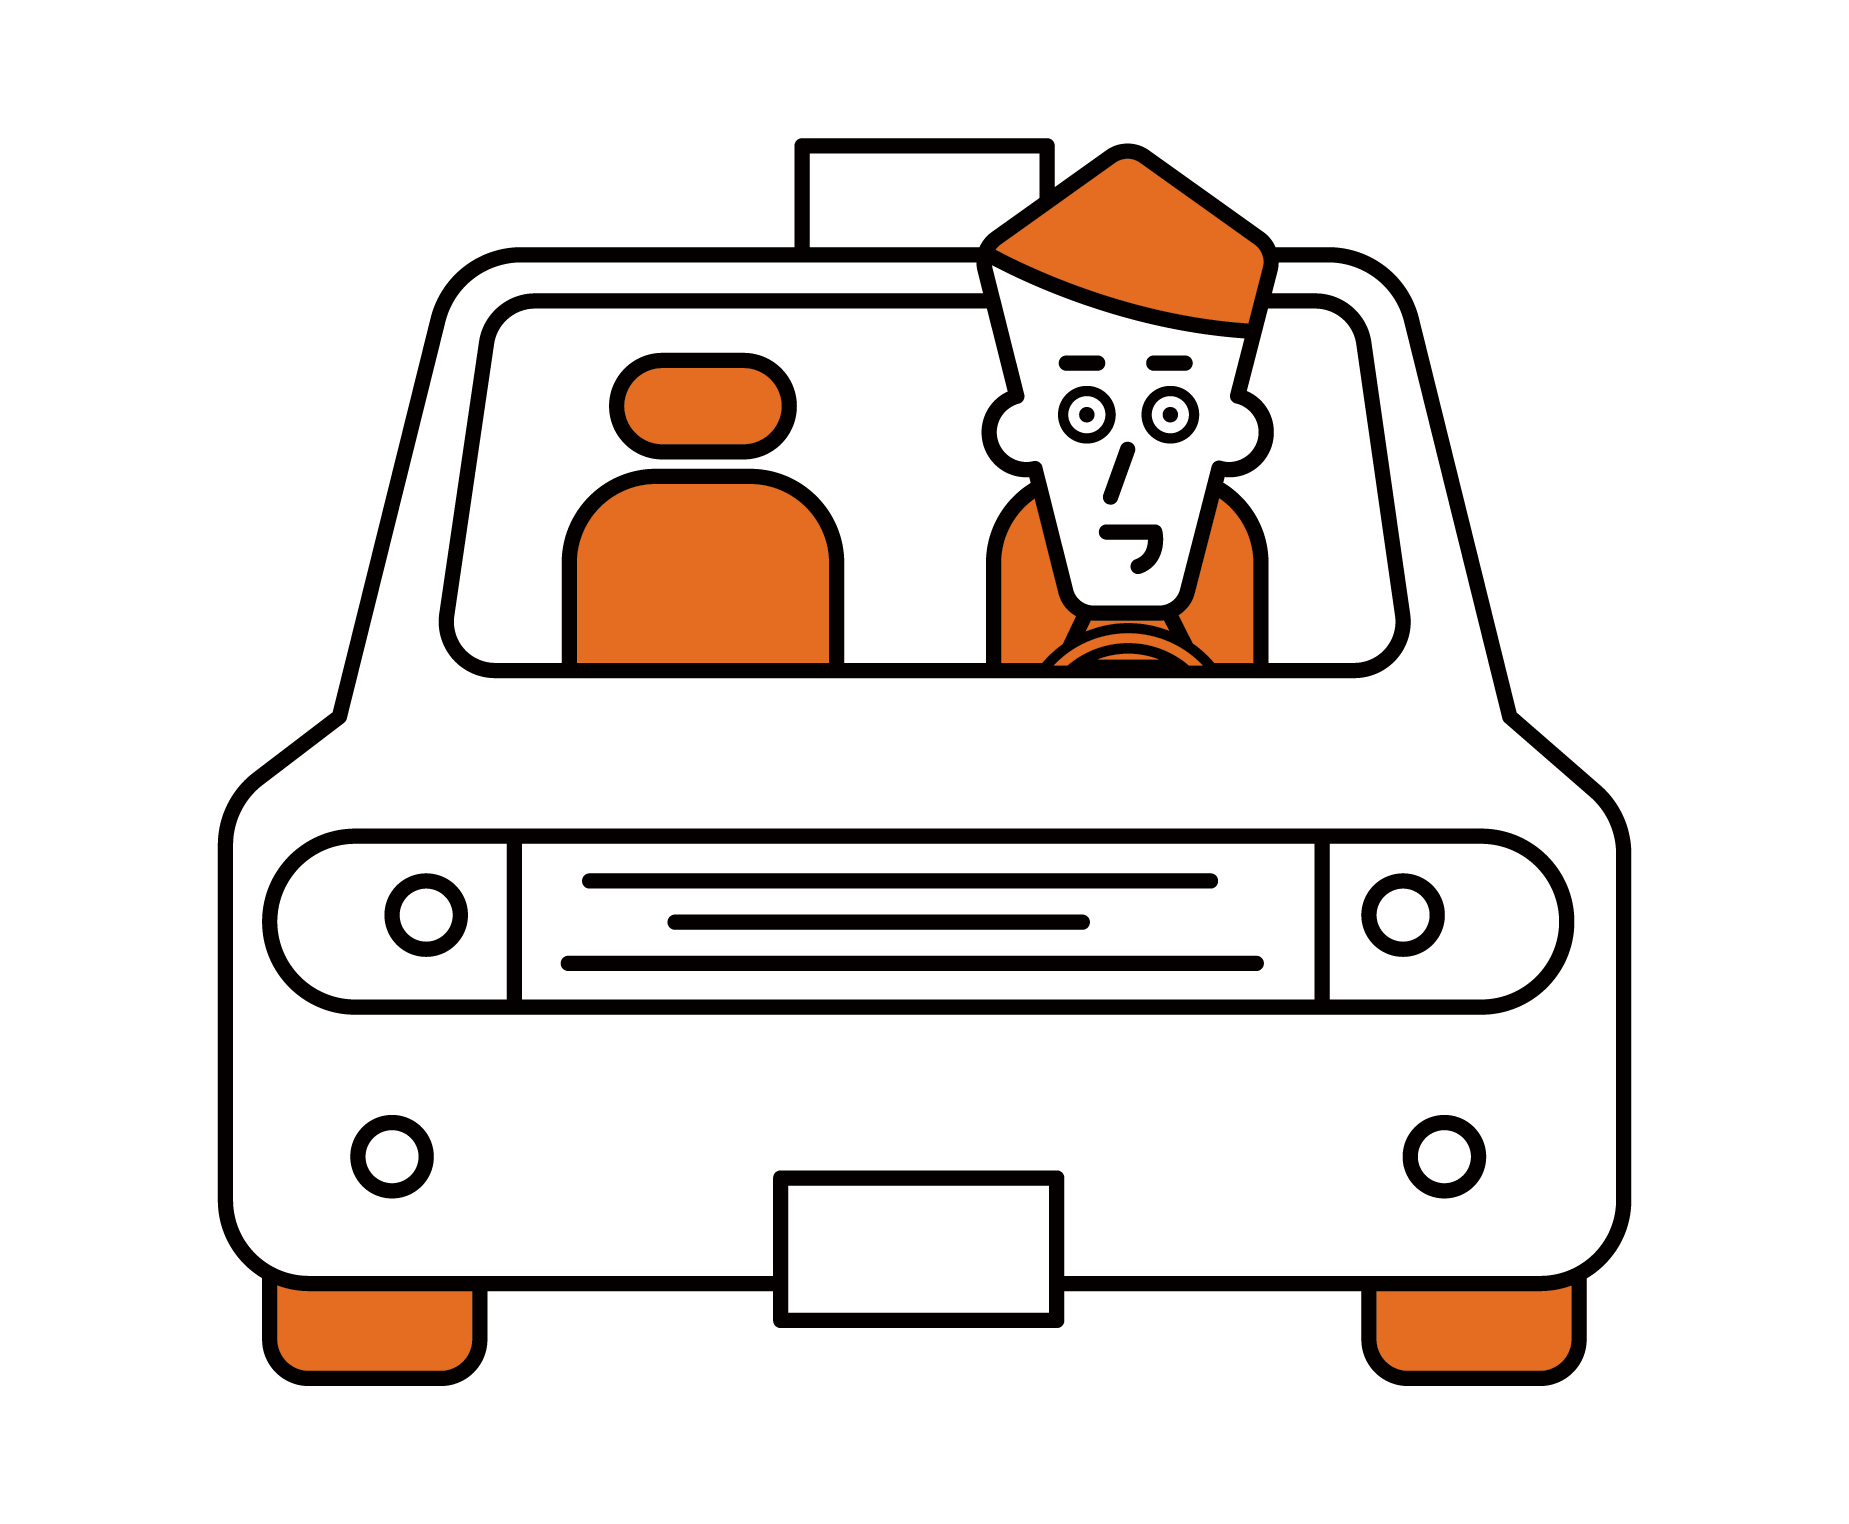 Illustration of a taxi driver (male)